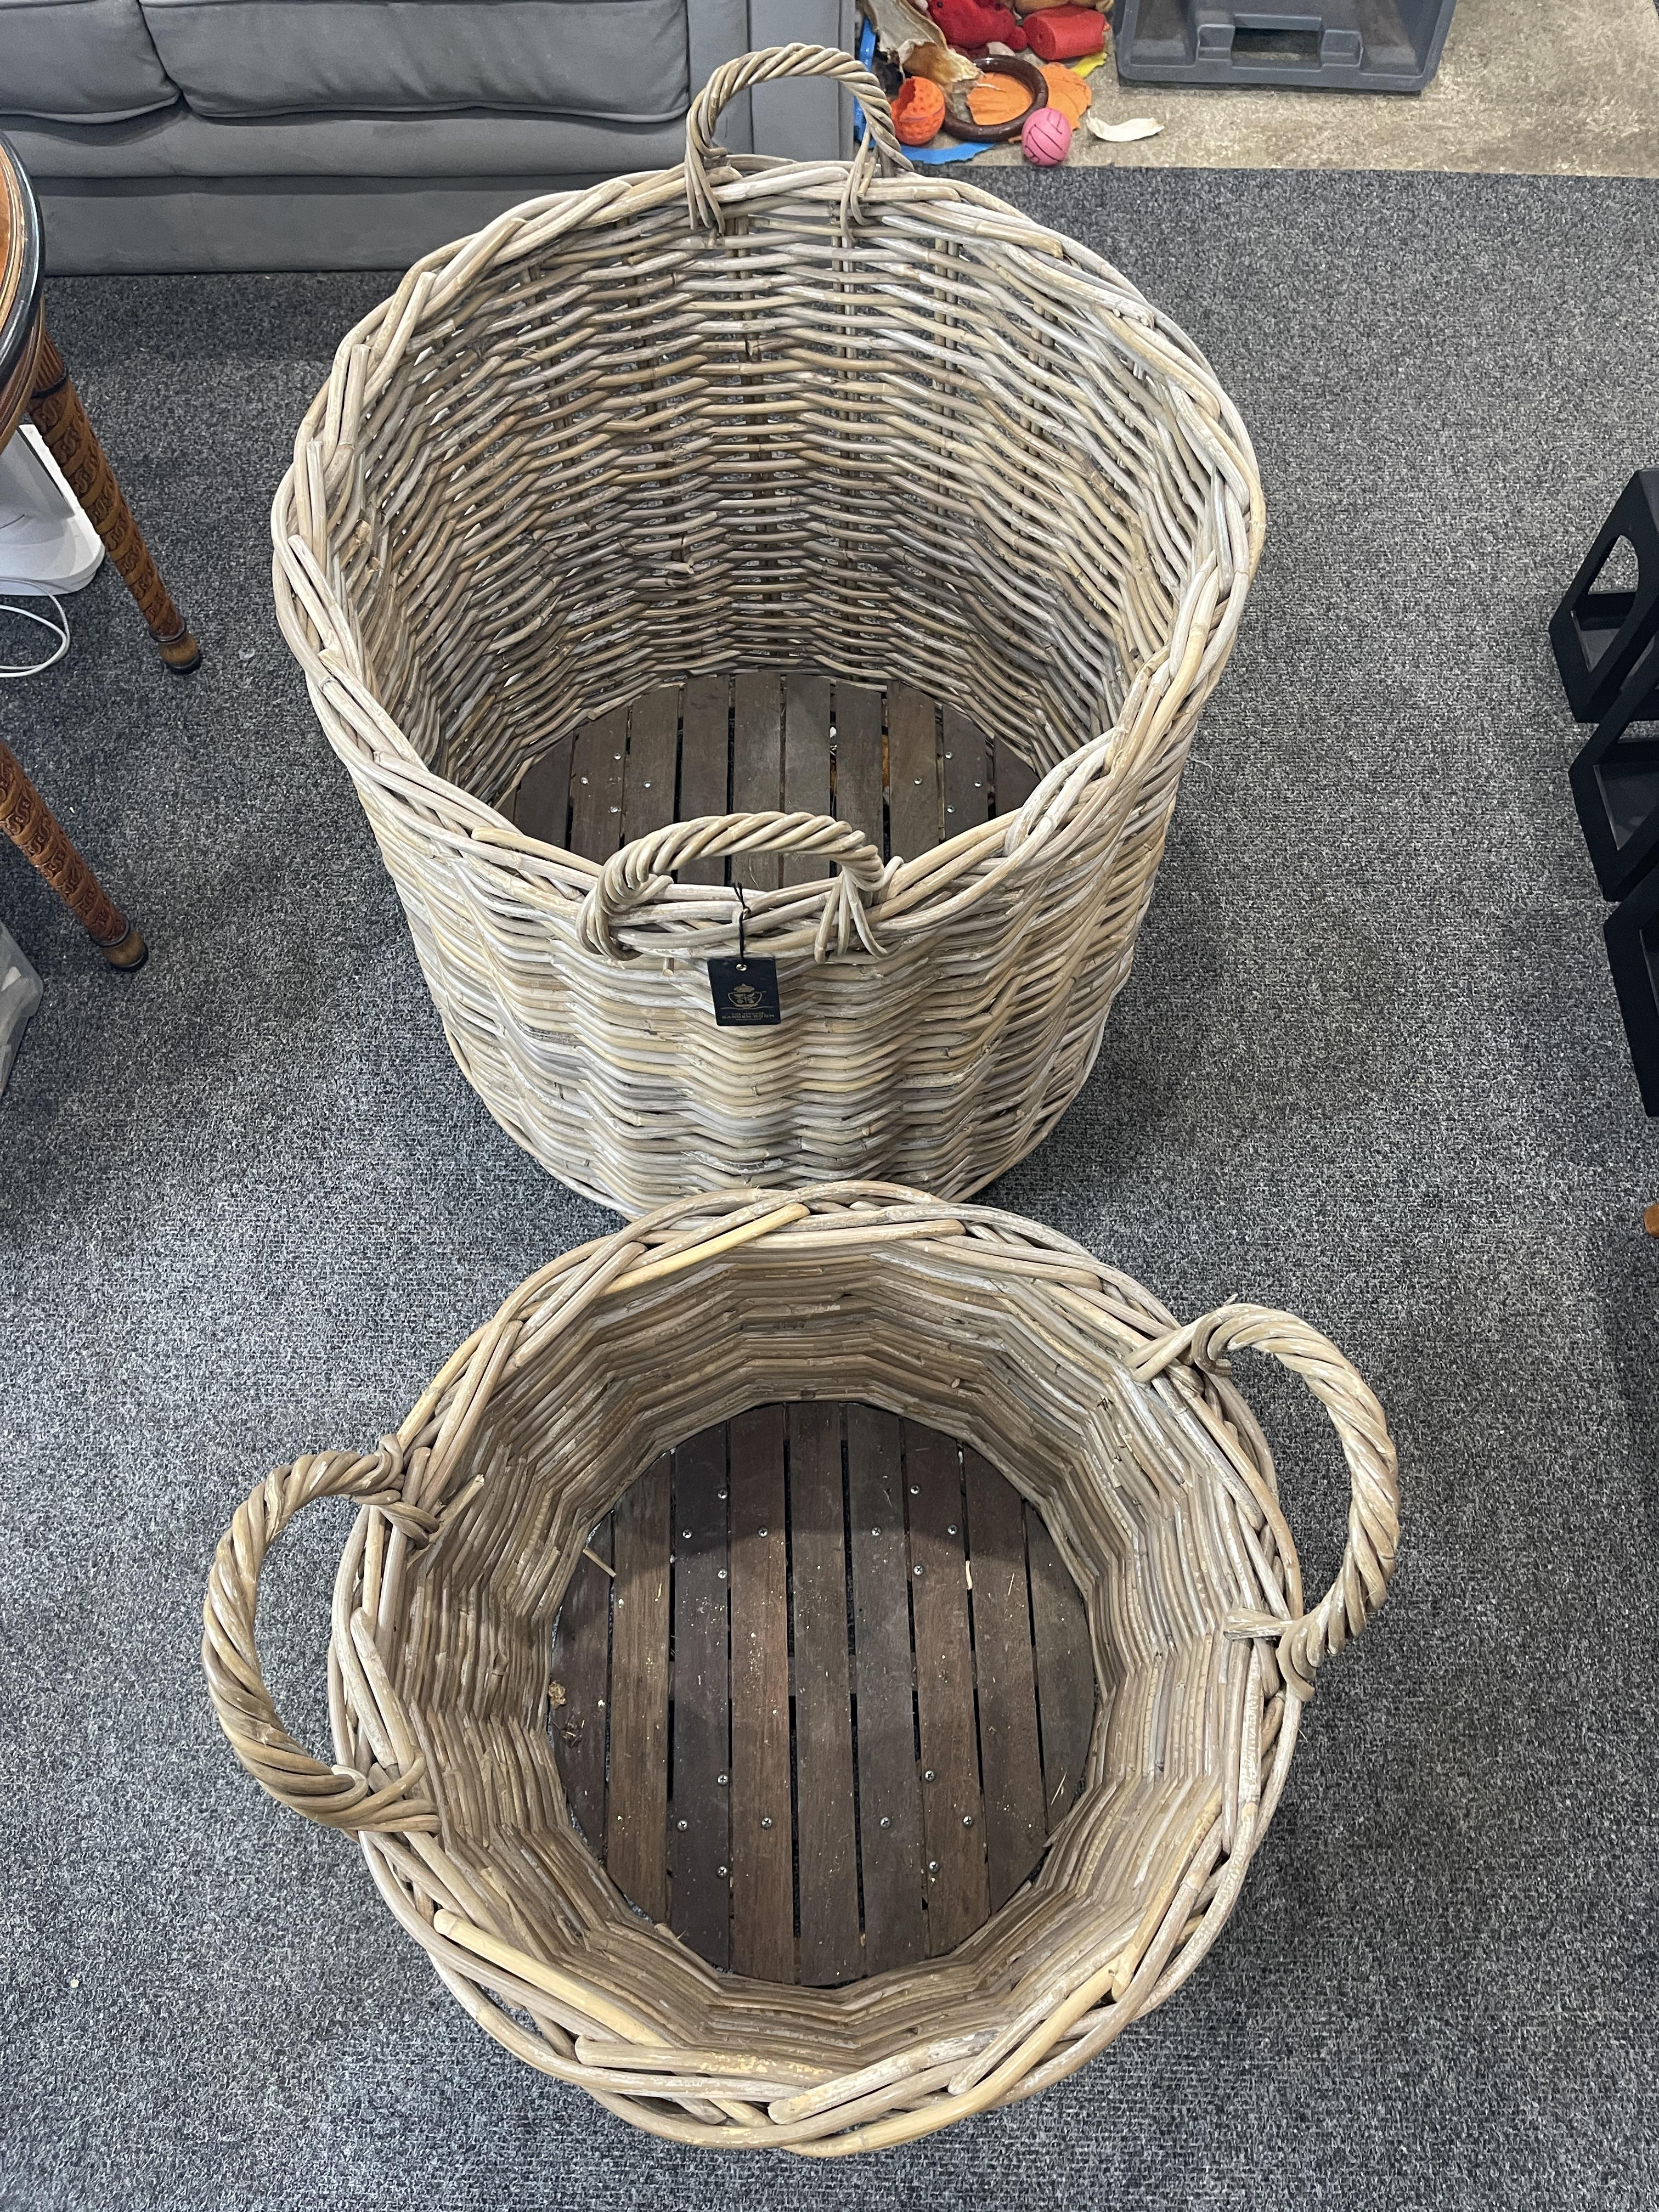 Two Large Vintage Wicker Baskets / Garden Rooms.